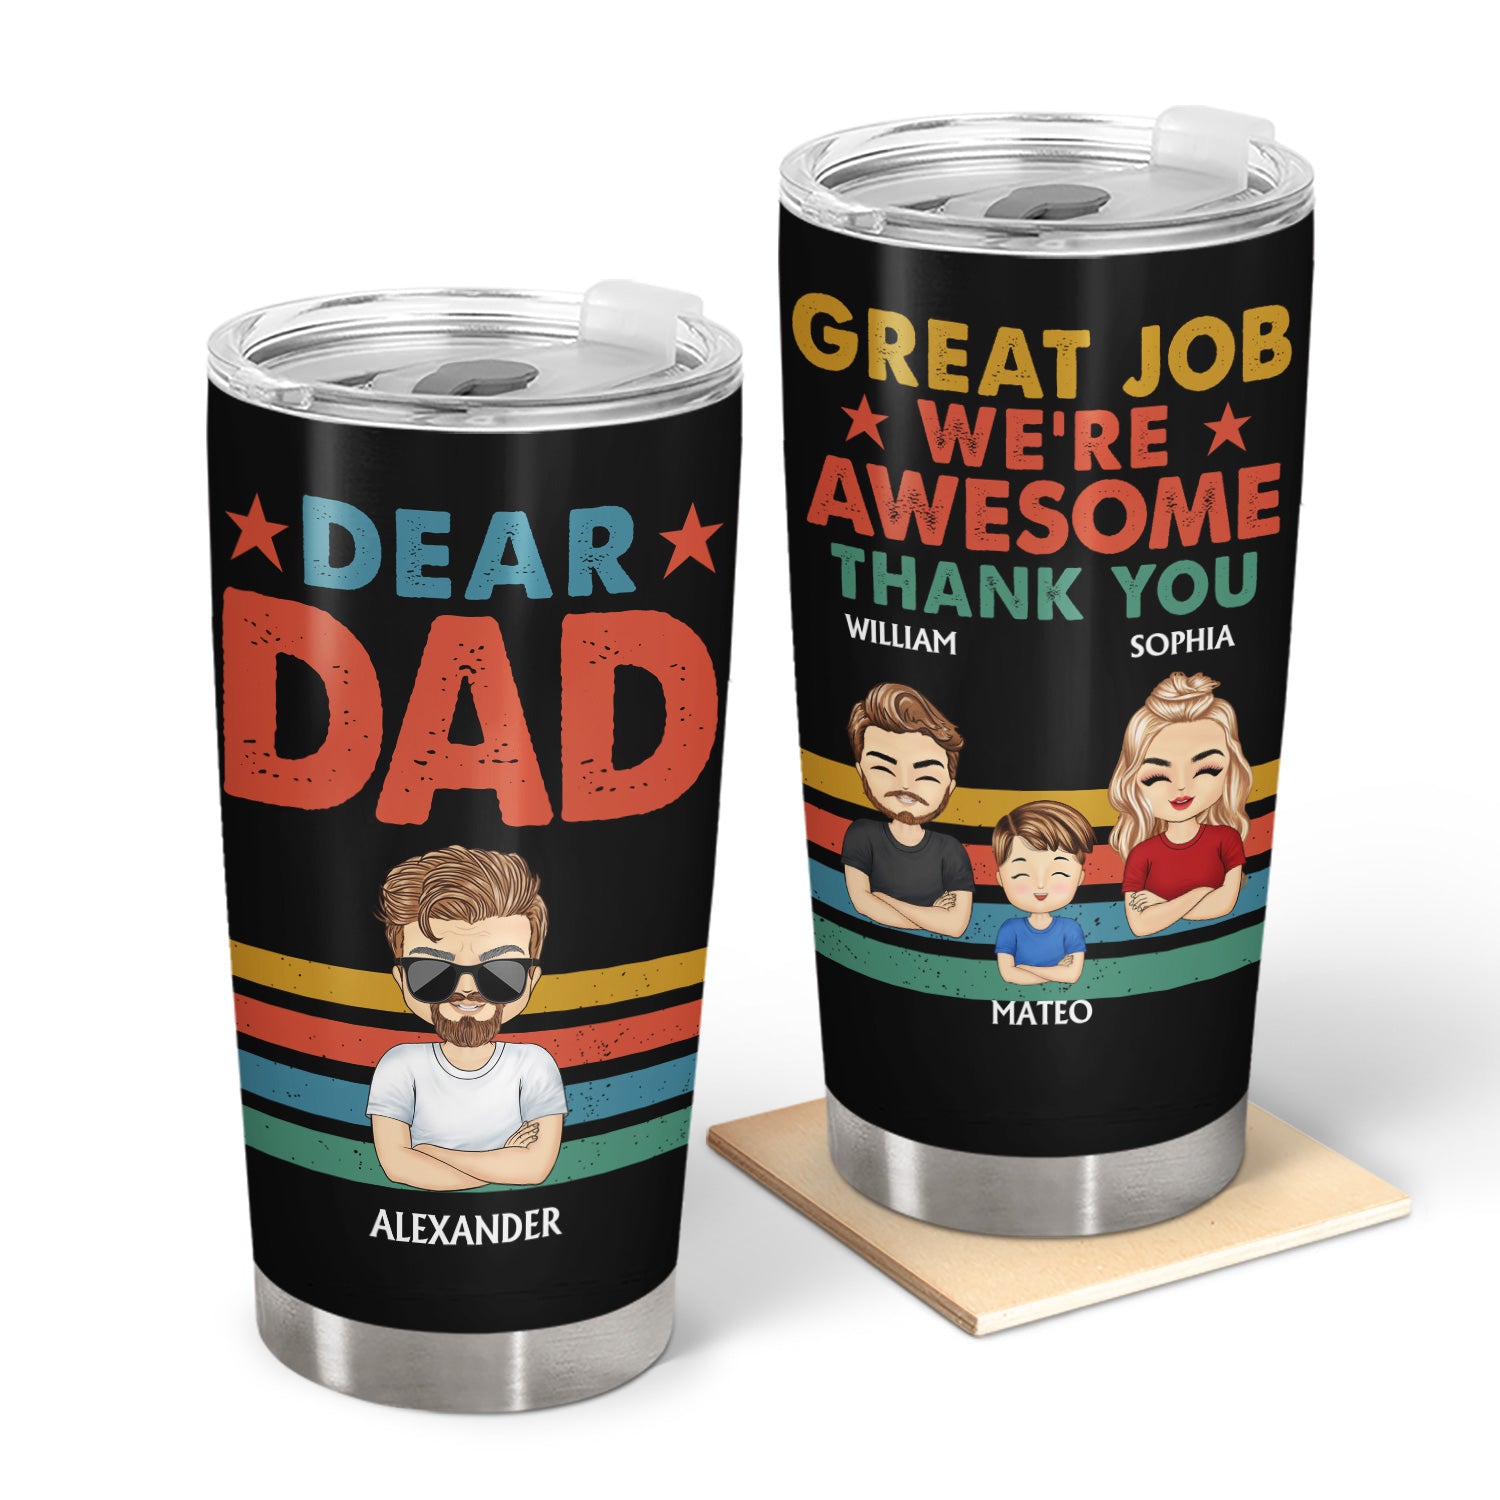 Dear Dad Great Job We're Awesome - Birthday Gift For Father, Grandpa, Family - Personalized Custom Tumbler